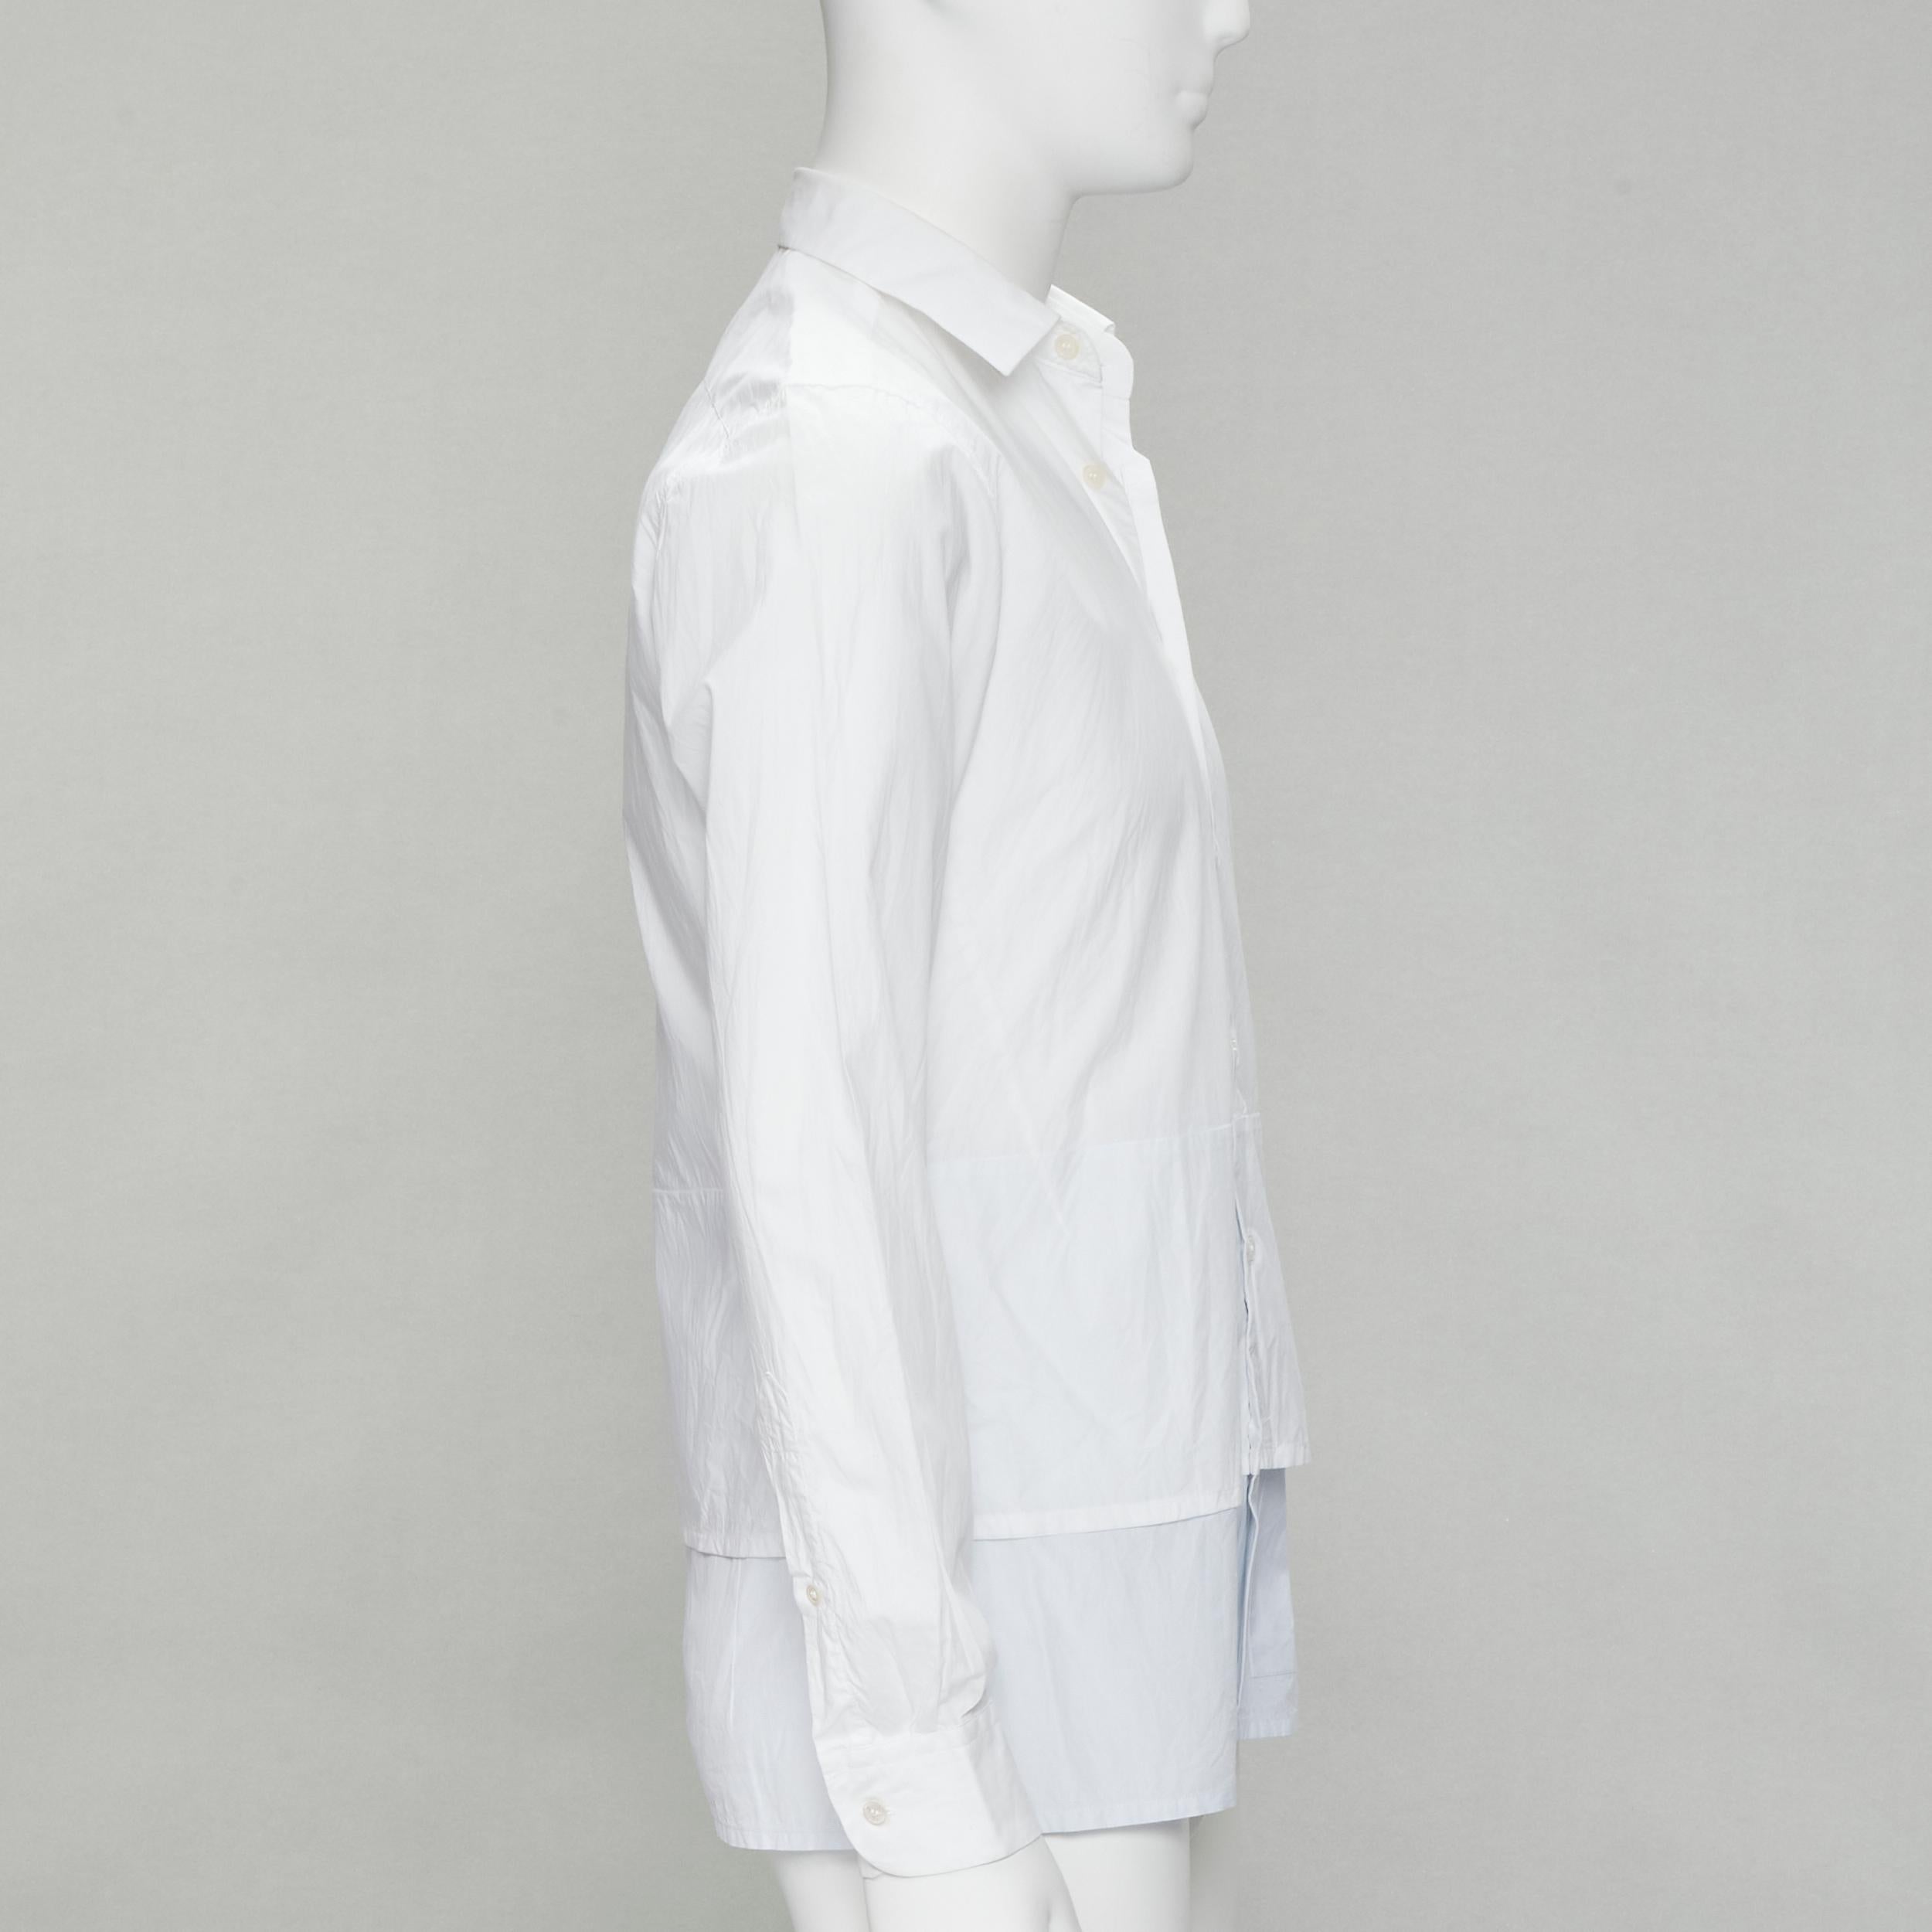 RAF SIMONS white extended layered hem deconstructed shirt EU44 S In Excellent Condition For Sale In Hong Kong, NT